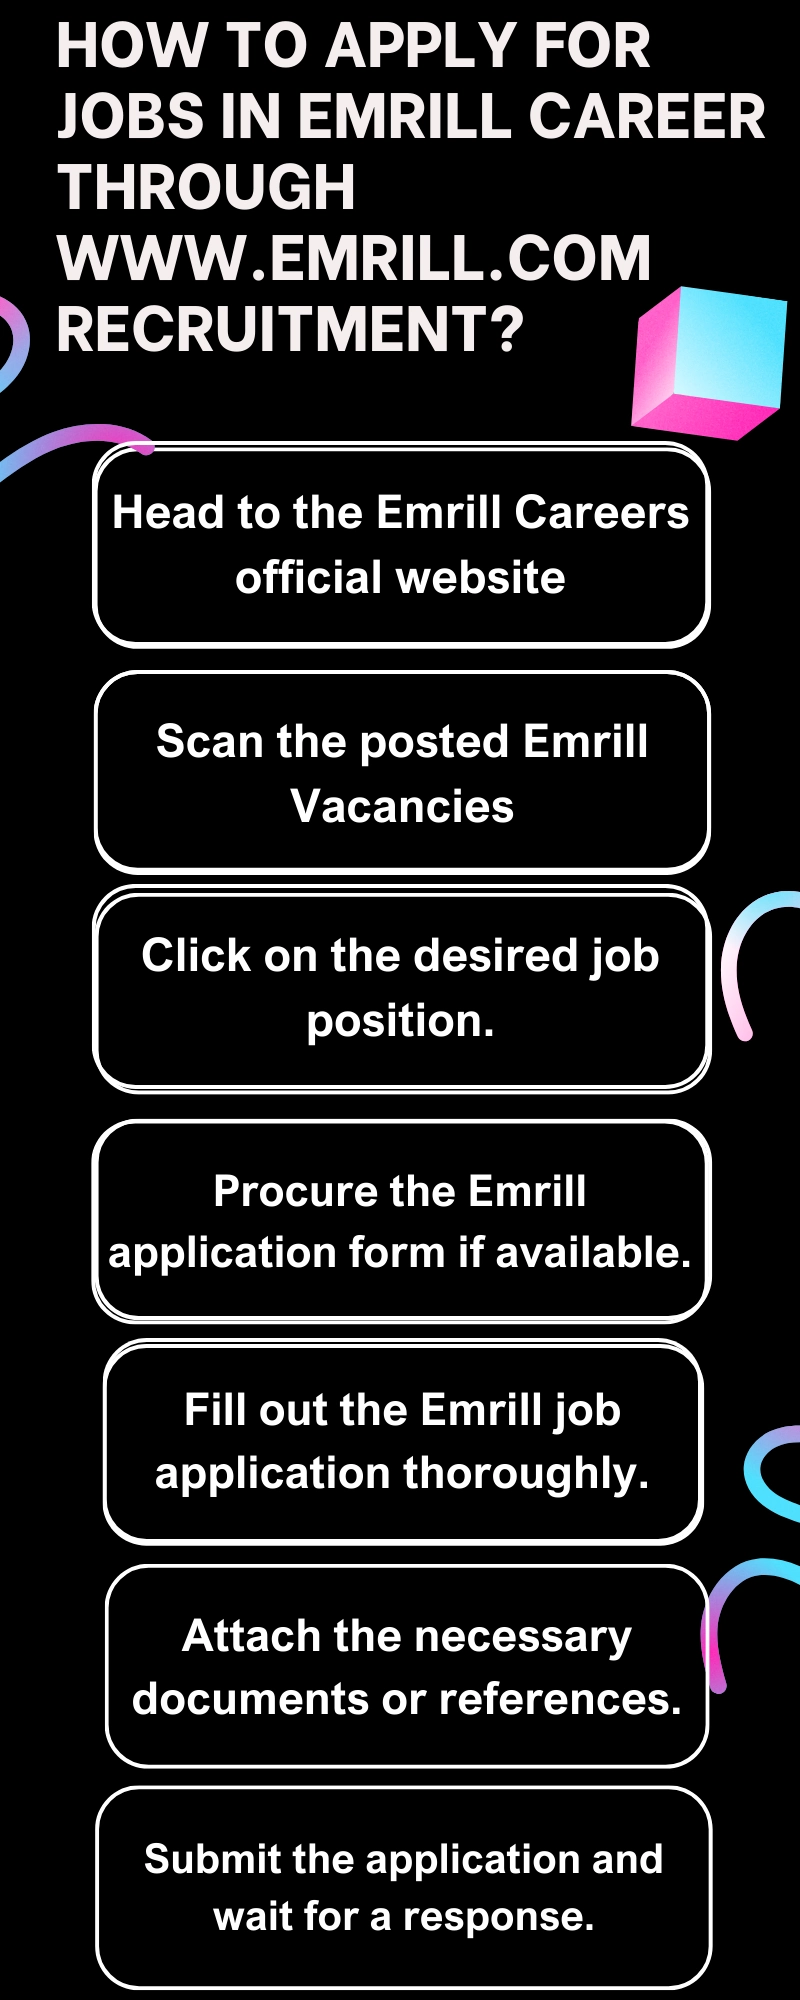 How to Apply for Jobs in Emrill Career through www.emrill.com recruitment?